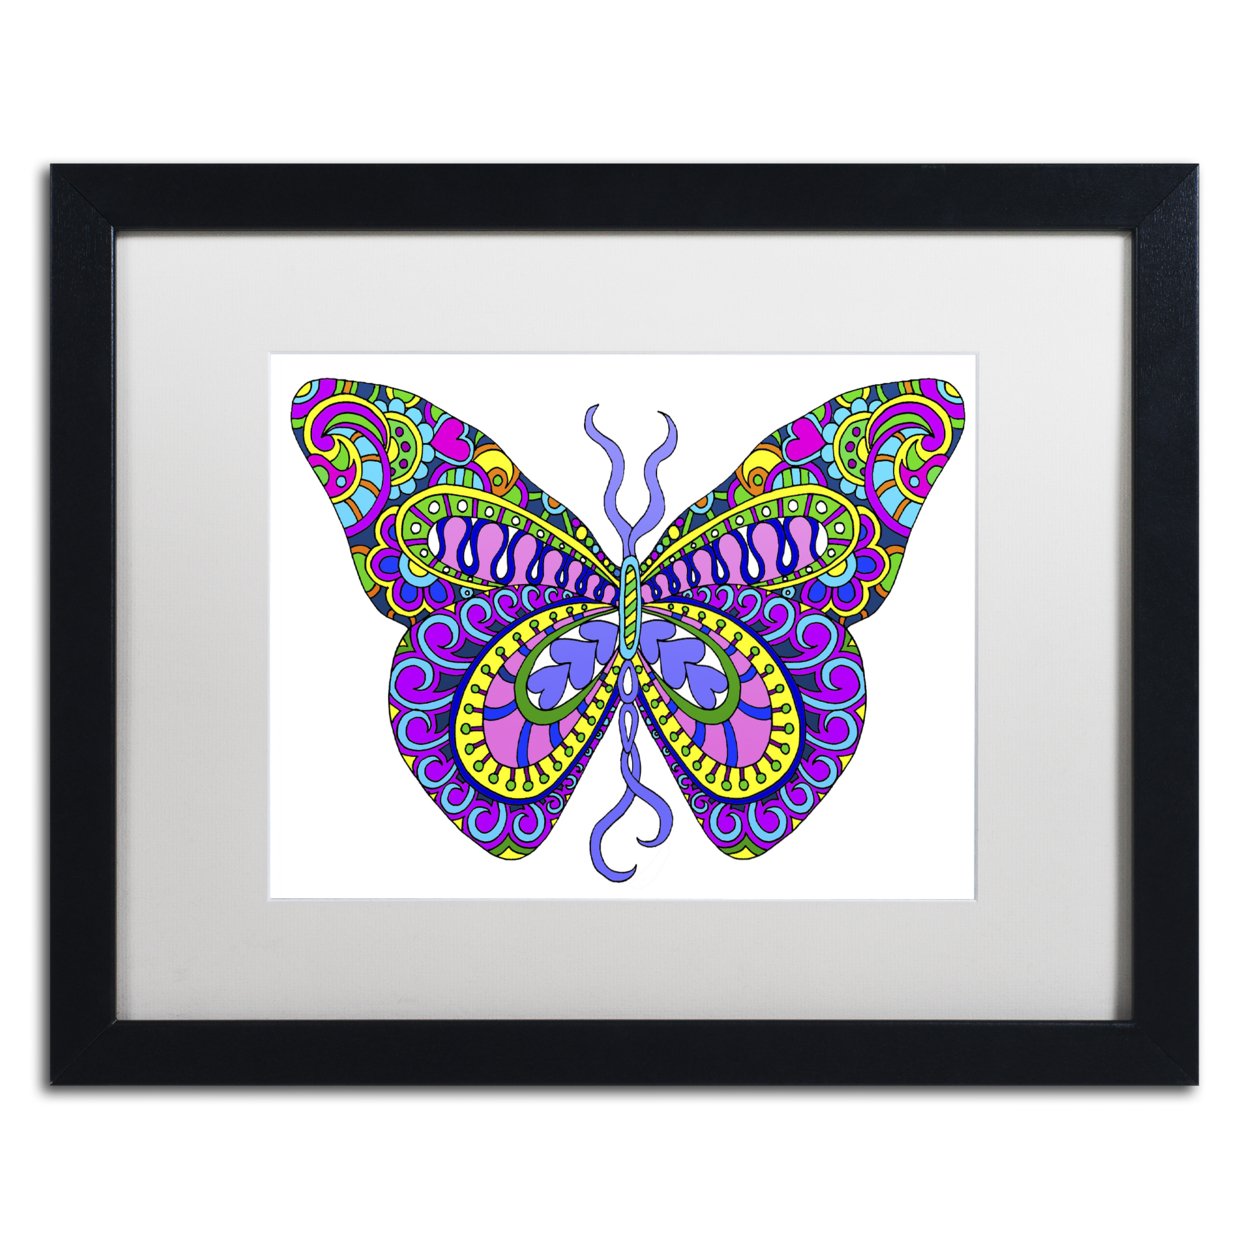 Kathy G. Ahrens 'Bashful Garden Butterfly Blooming' Black Wooden Framed Art 18 X 22 Inches